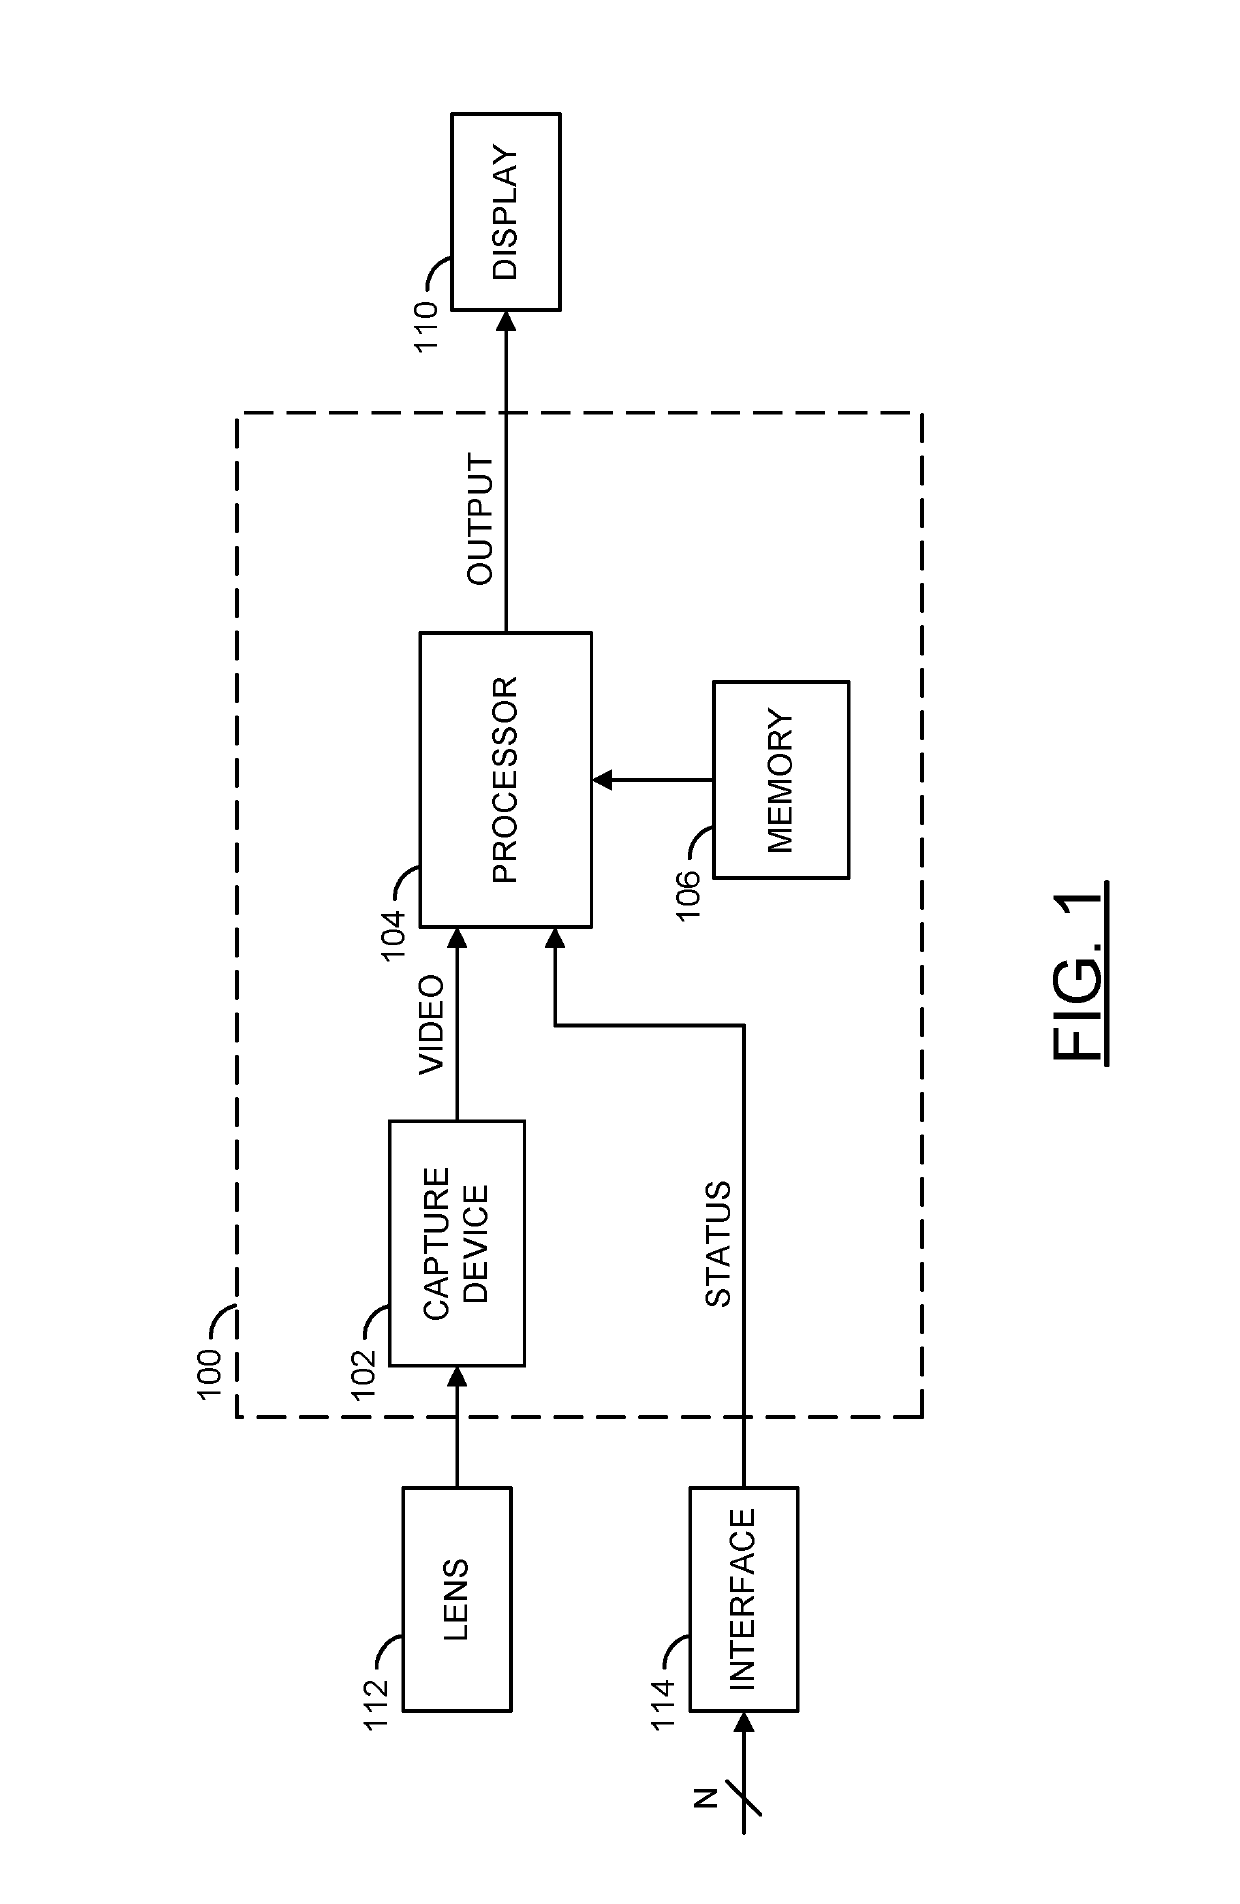 Reduction of LED headlight flickering in electronic mirror applications